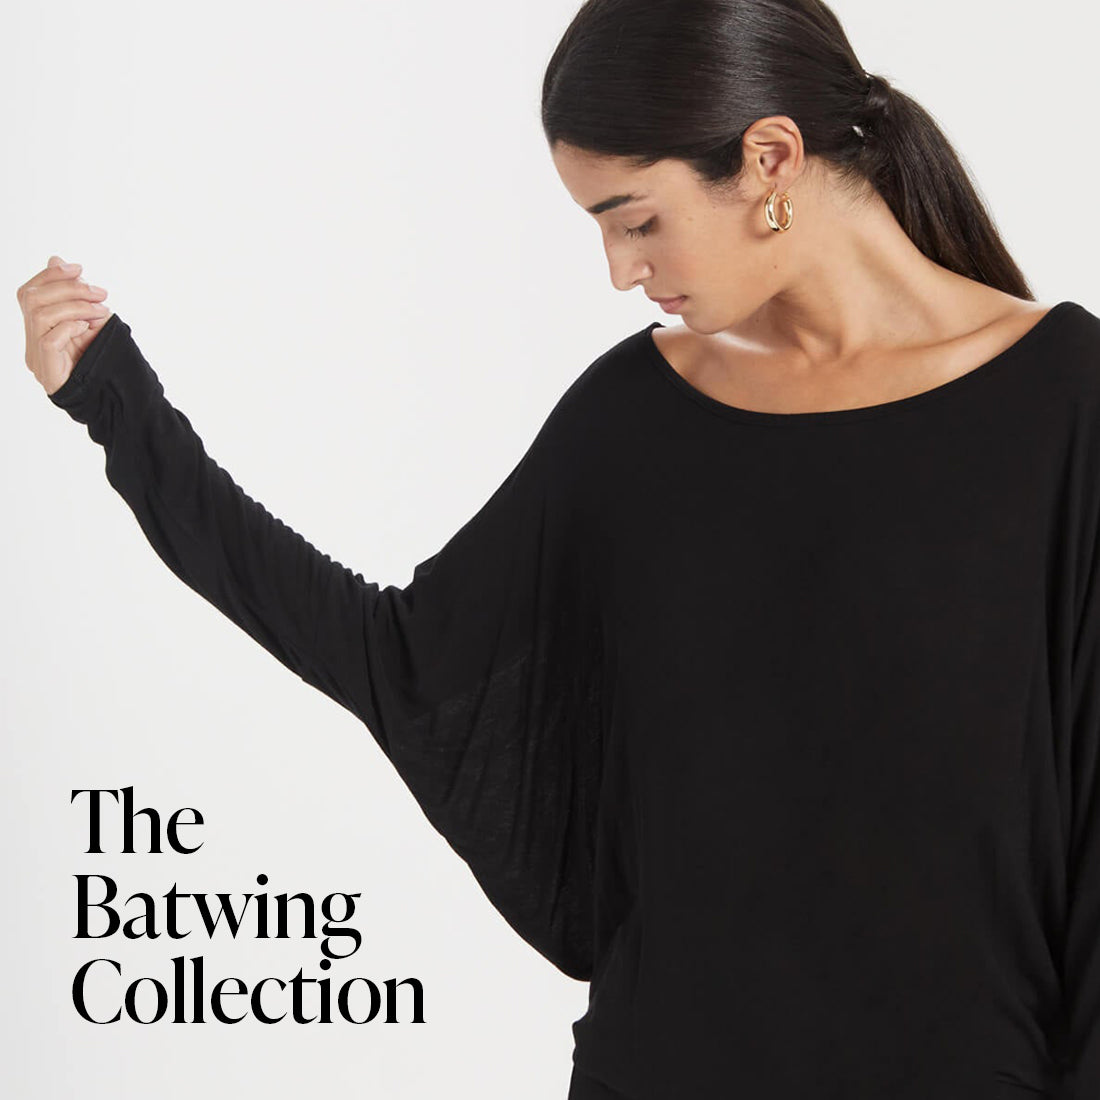 Batwing Loose Minimalist Tops - The Batwing Collection